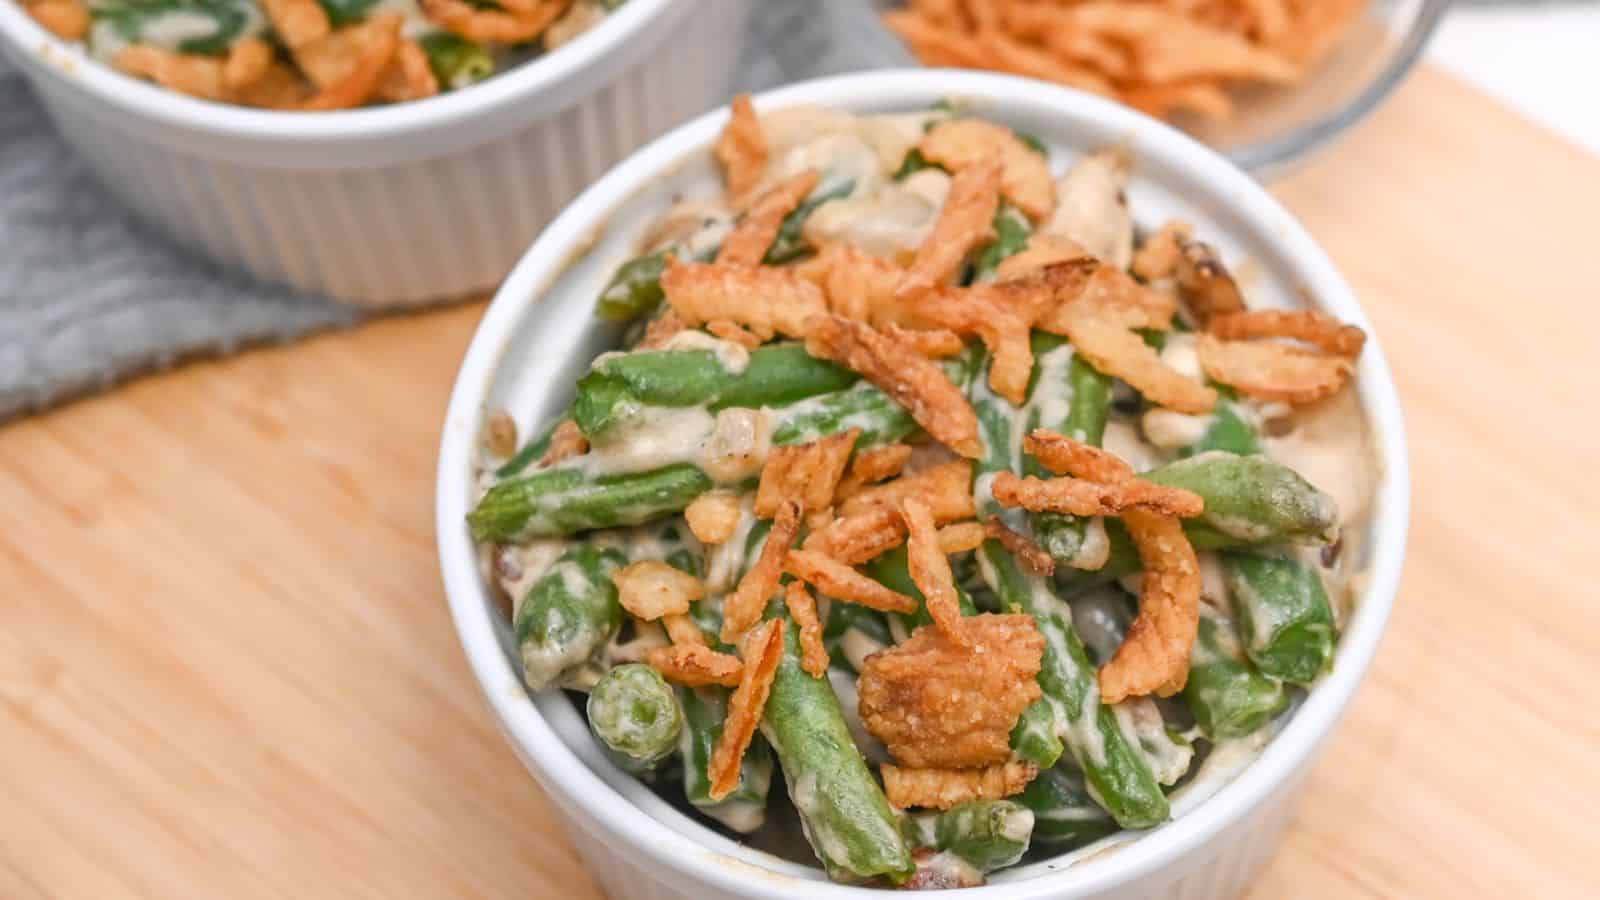 A ramekin of green bean casserole topped with crispy fried onions, served on a wooden table.